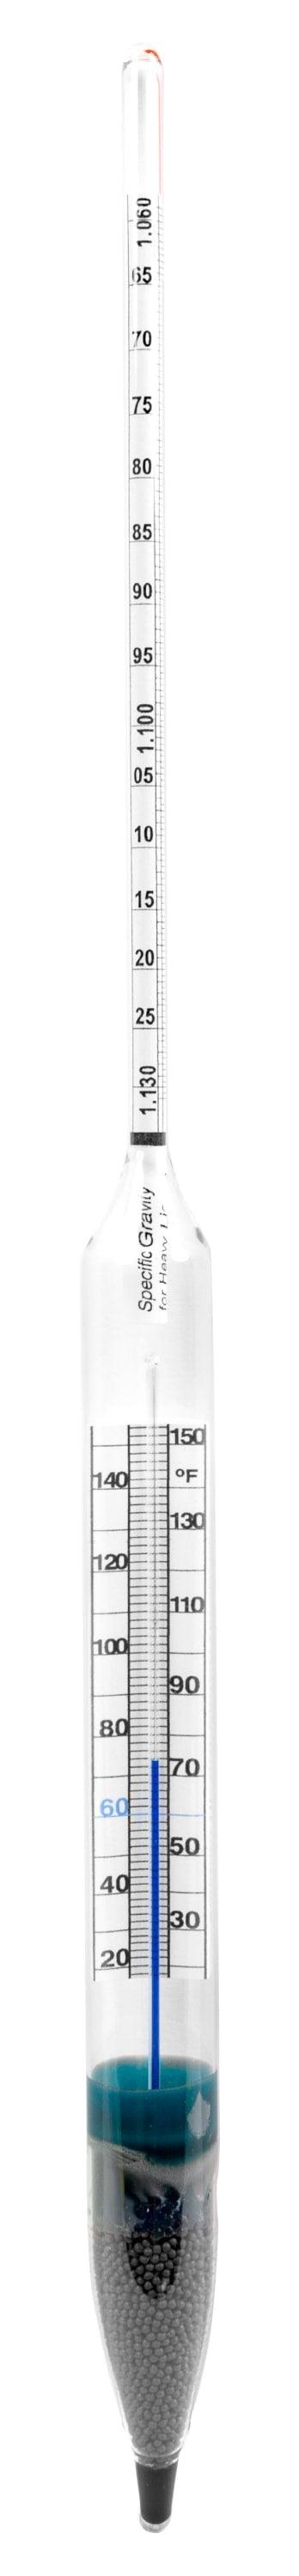 Specific Gravity Hydrometers with Thermometer from VEE GEE Scientific